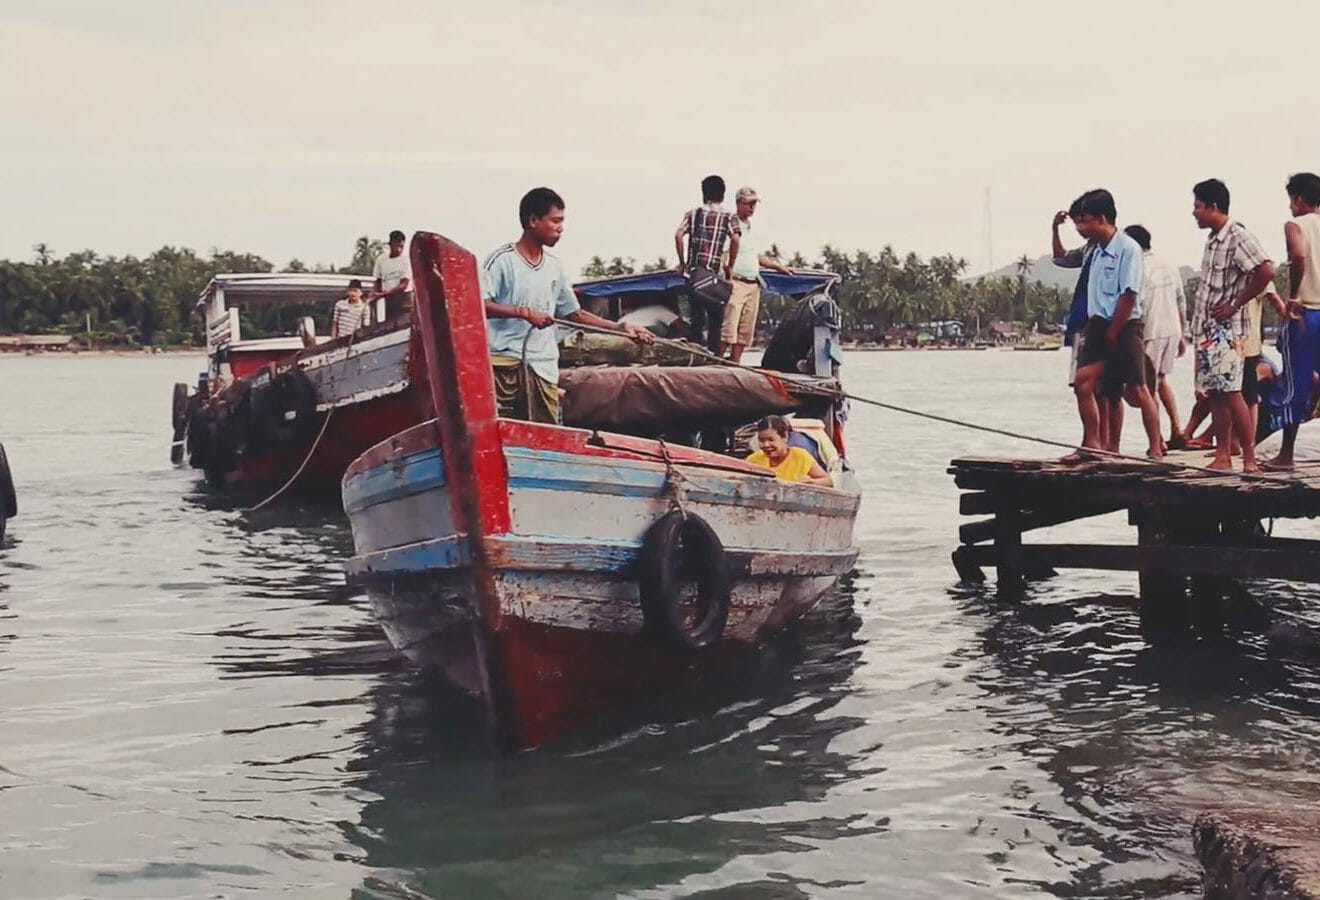 VIDEO - One Boat, One Journey